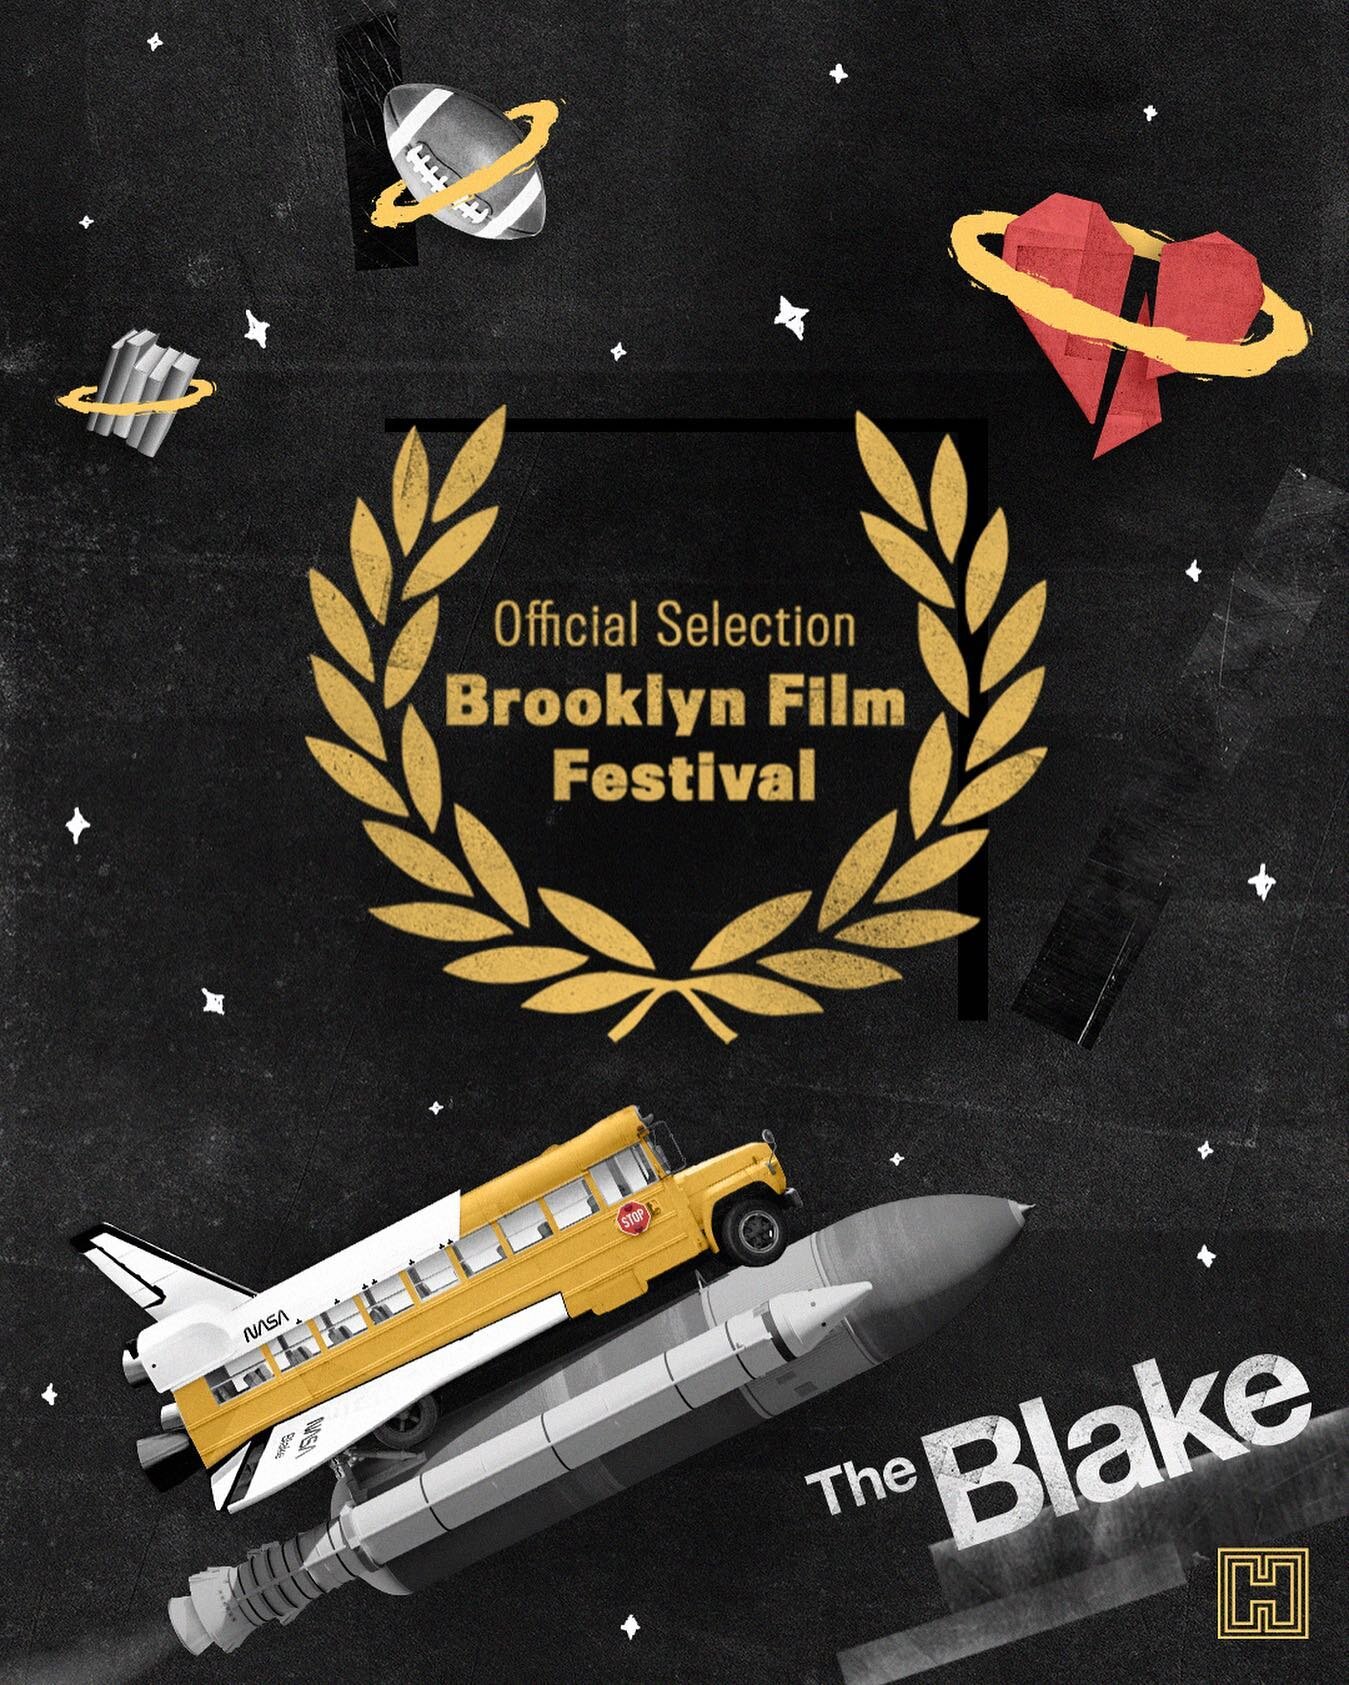 NY friends, come see THE BLAKE @brooklynfilmfestival this Sunday at 2pm! Tickets at link in bio 🚀

So excited to land the mothership in our old neighborhood, Williamsburg BK 🖖🏽

#bff #bff2023 #brooklynfilmfestival #brooklynfilm #brooklynfilmmaker 